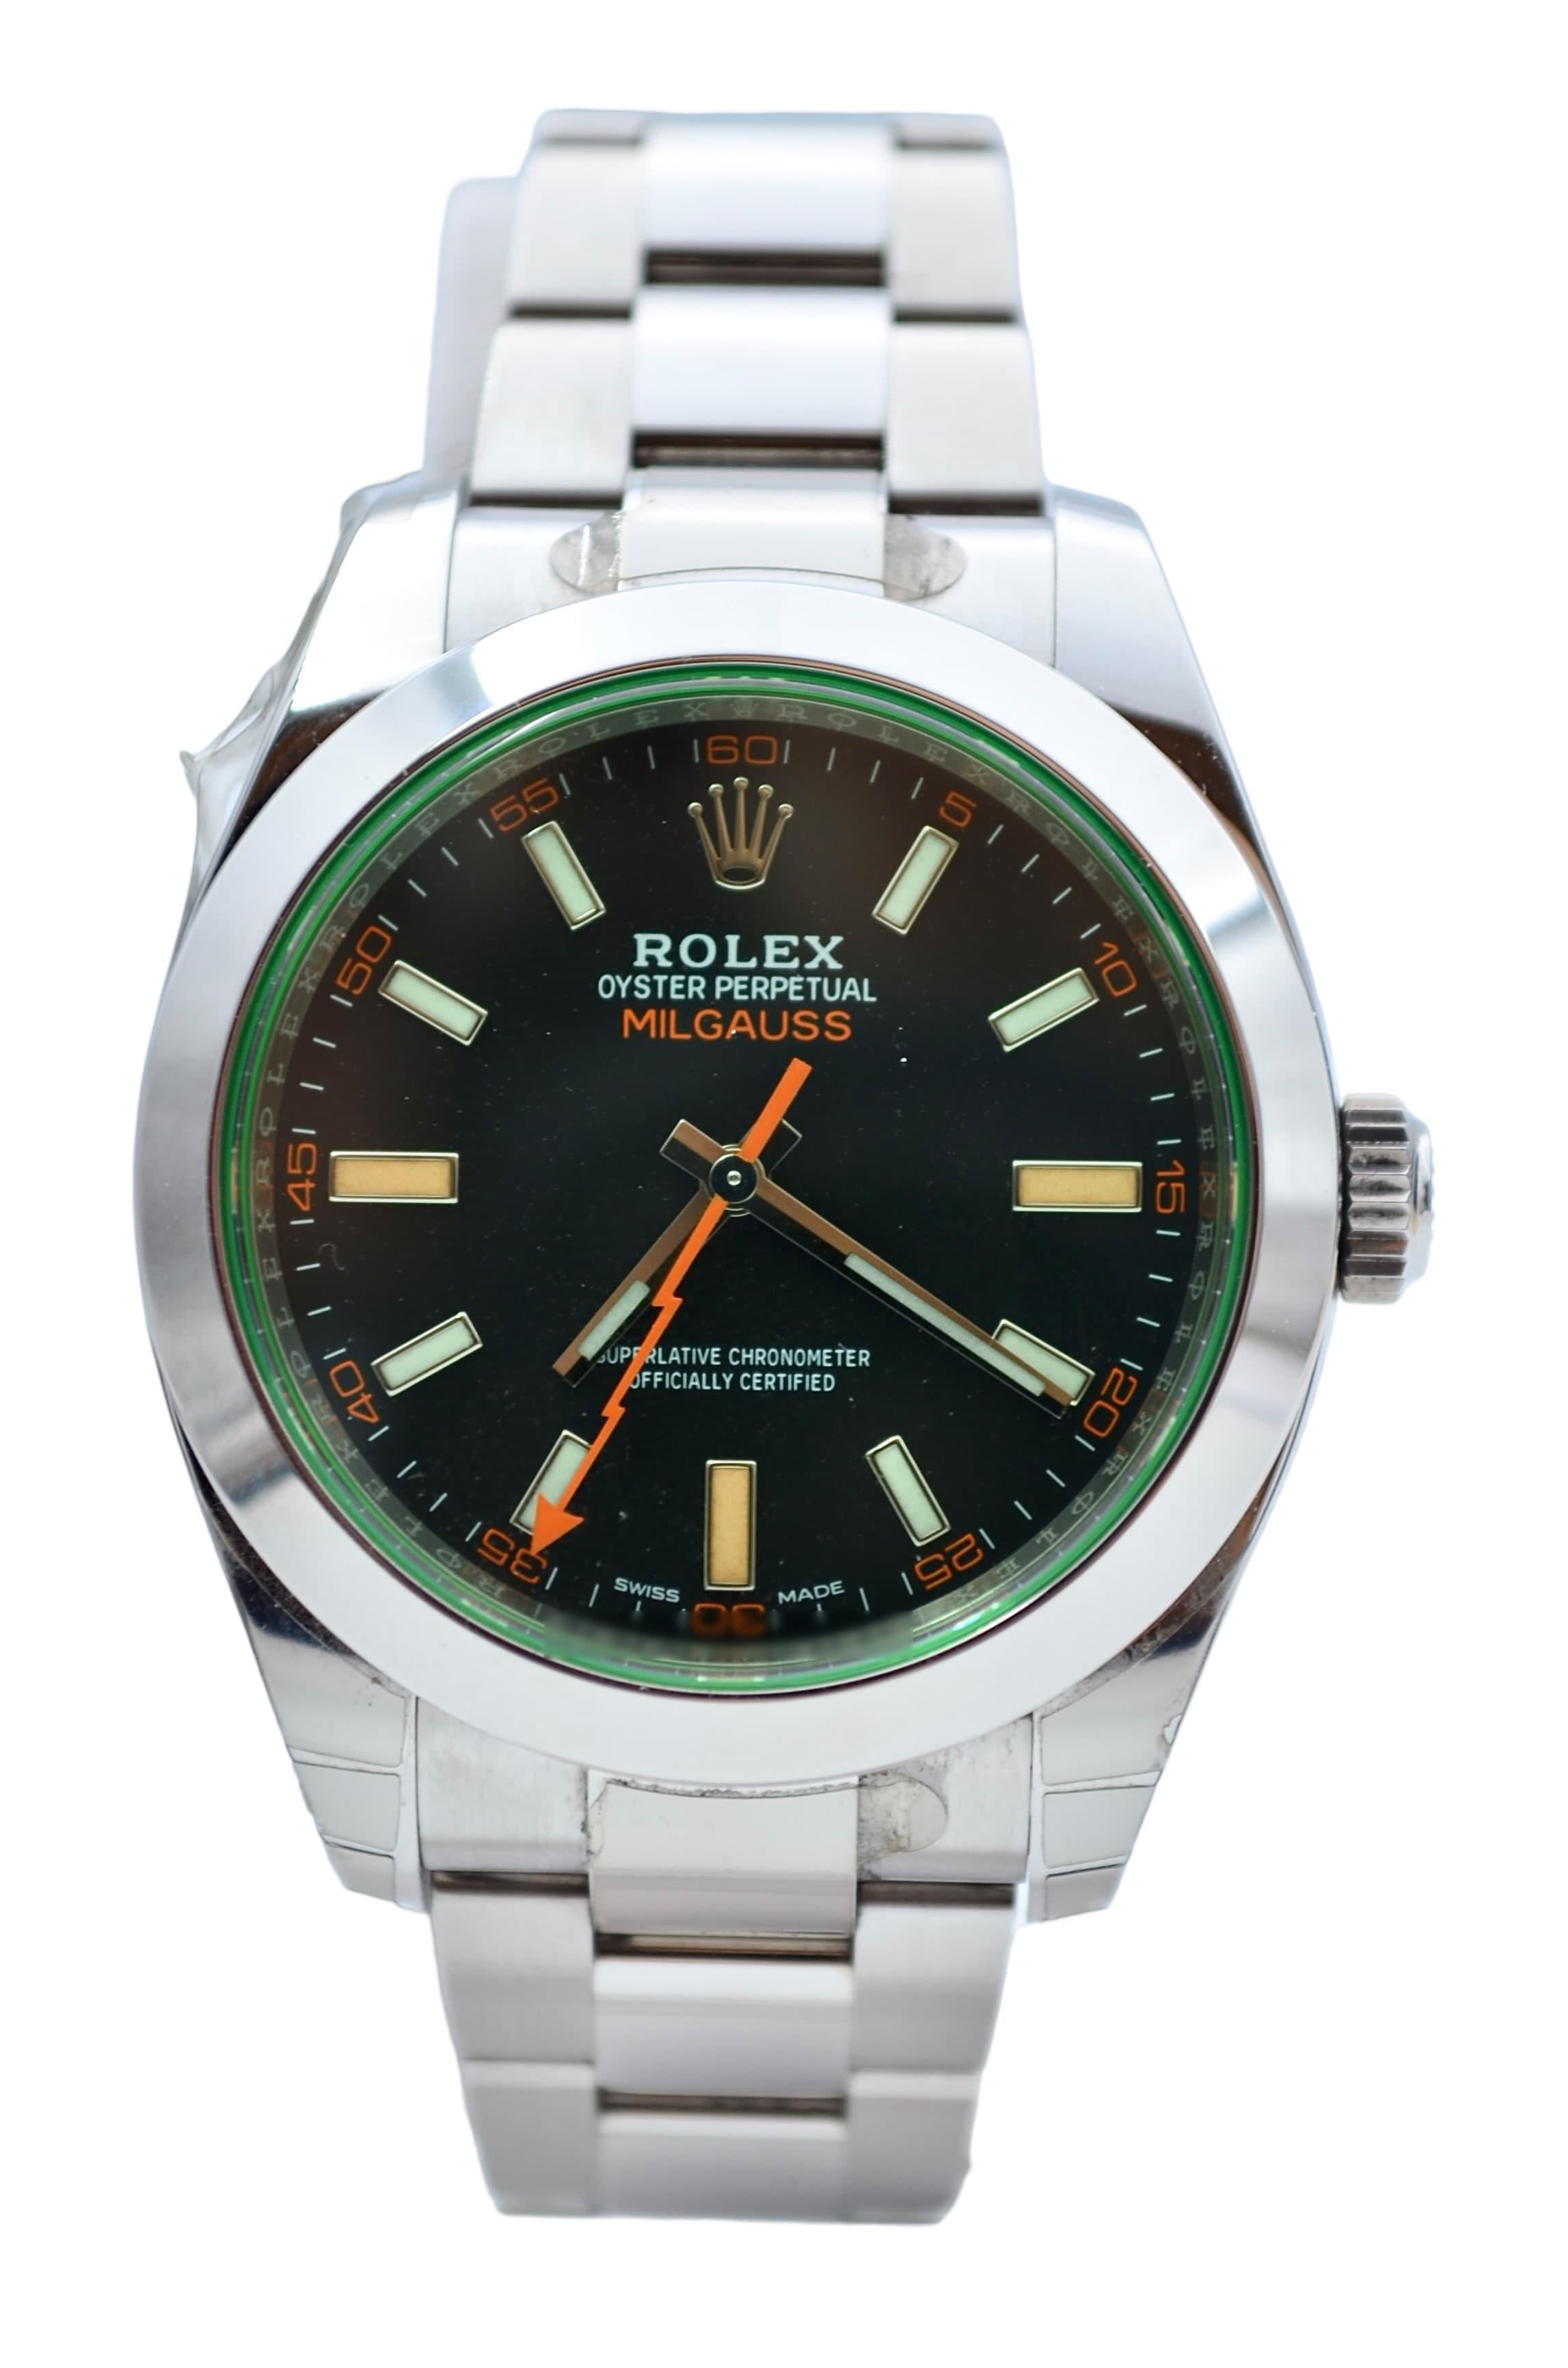 the rolex who cares for sale